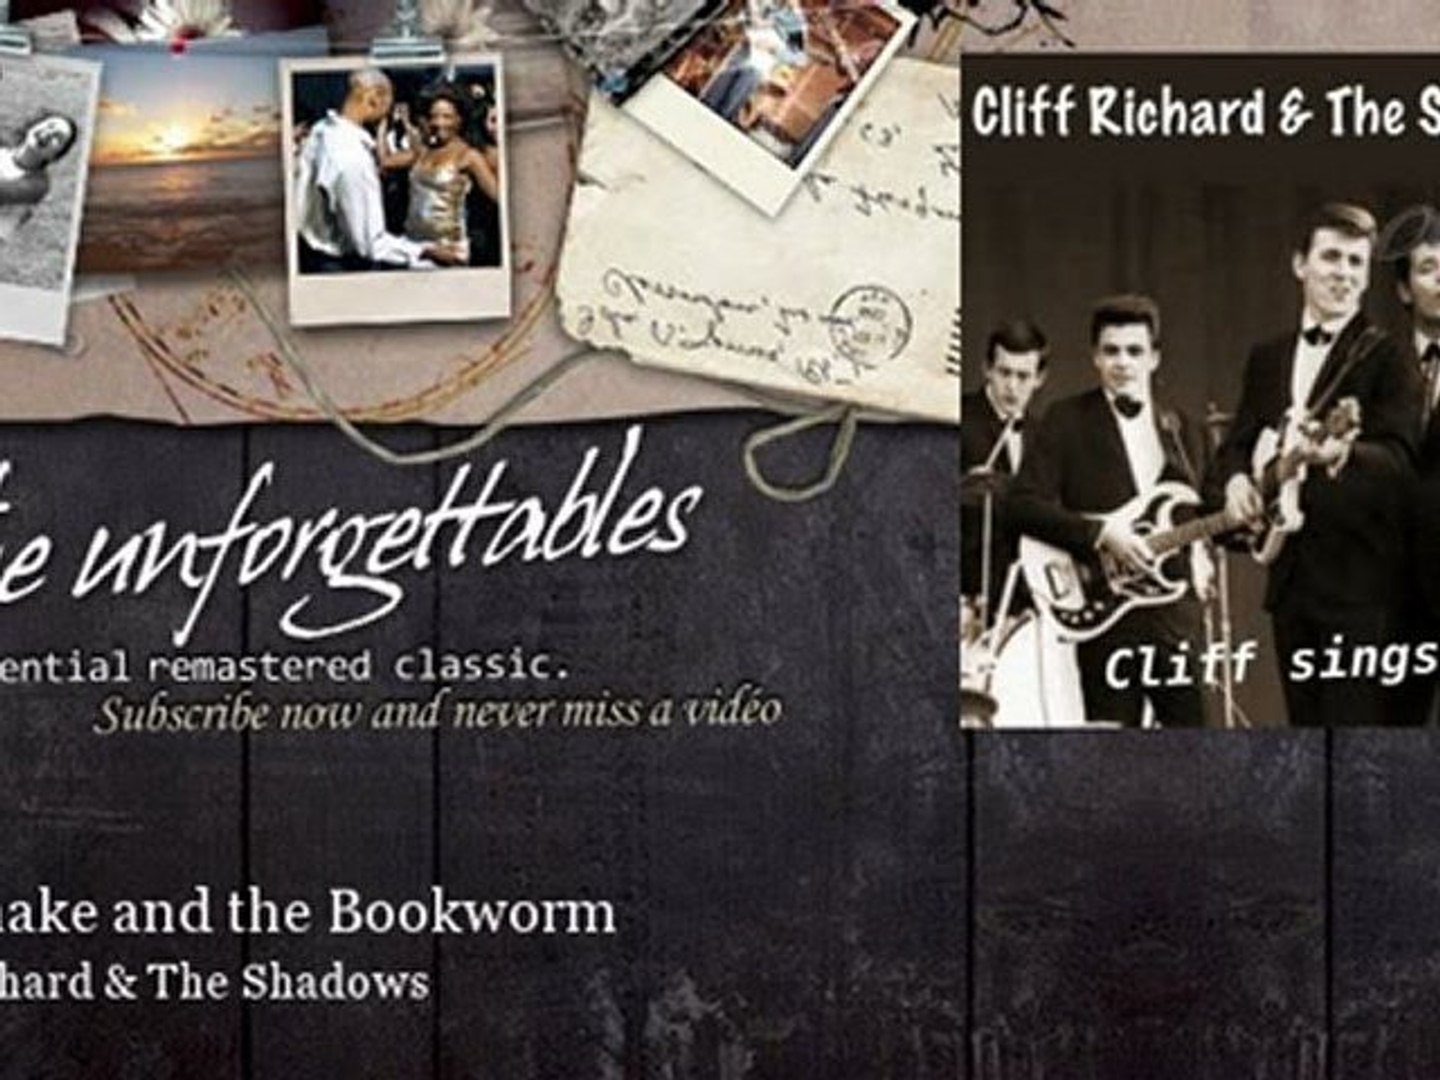 ⁣Cliff Richard & The Shadows - The Snake and the Bookworm